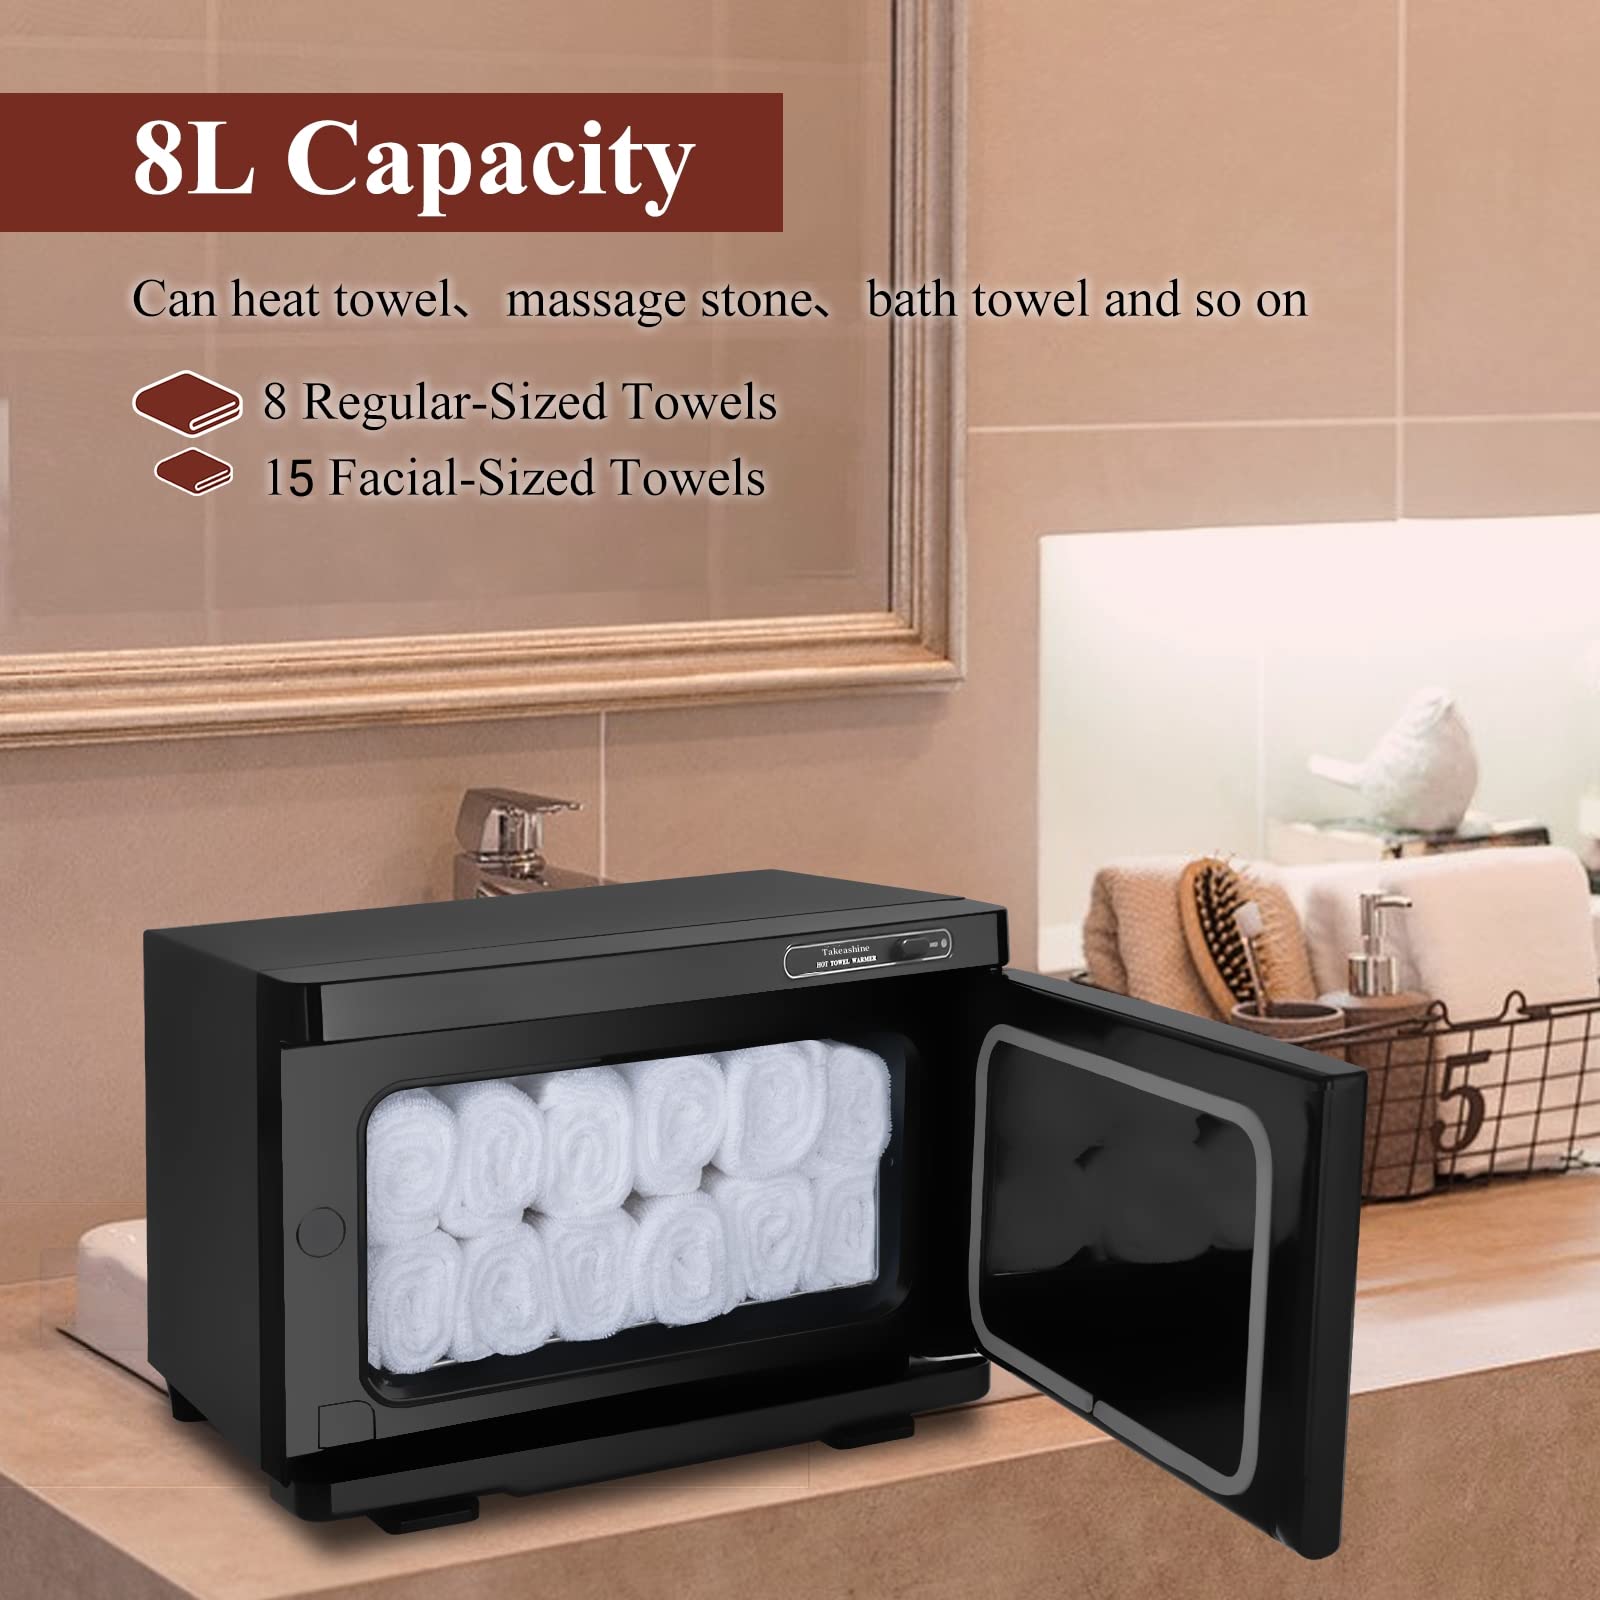 Towel Warmer, Hot Towel Warmer, Hot Towel Cabinet with 8L Space, Spa Towel Warmer, Professional Towel Warmer for Salon and Spa Use